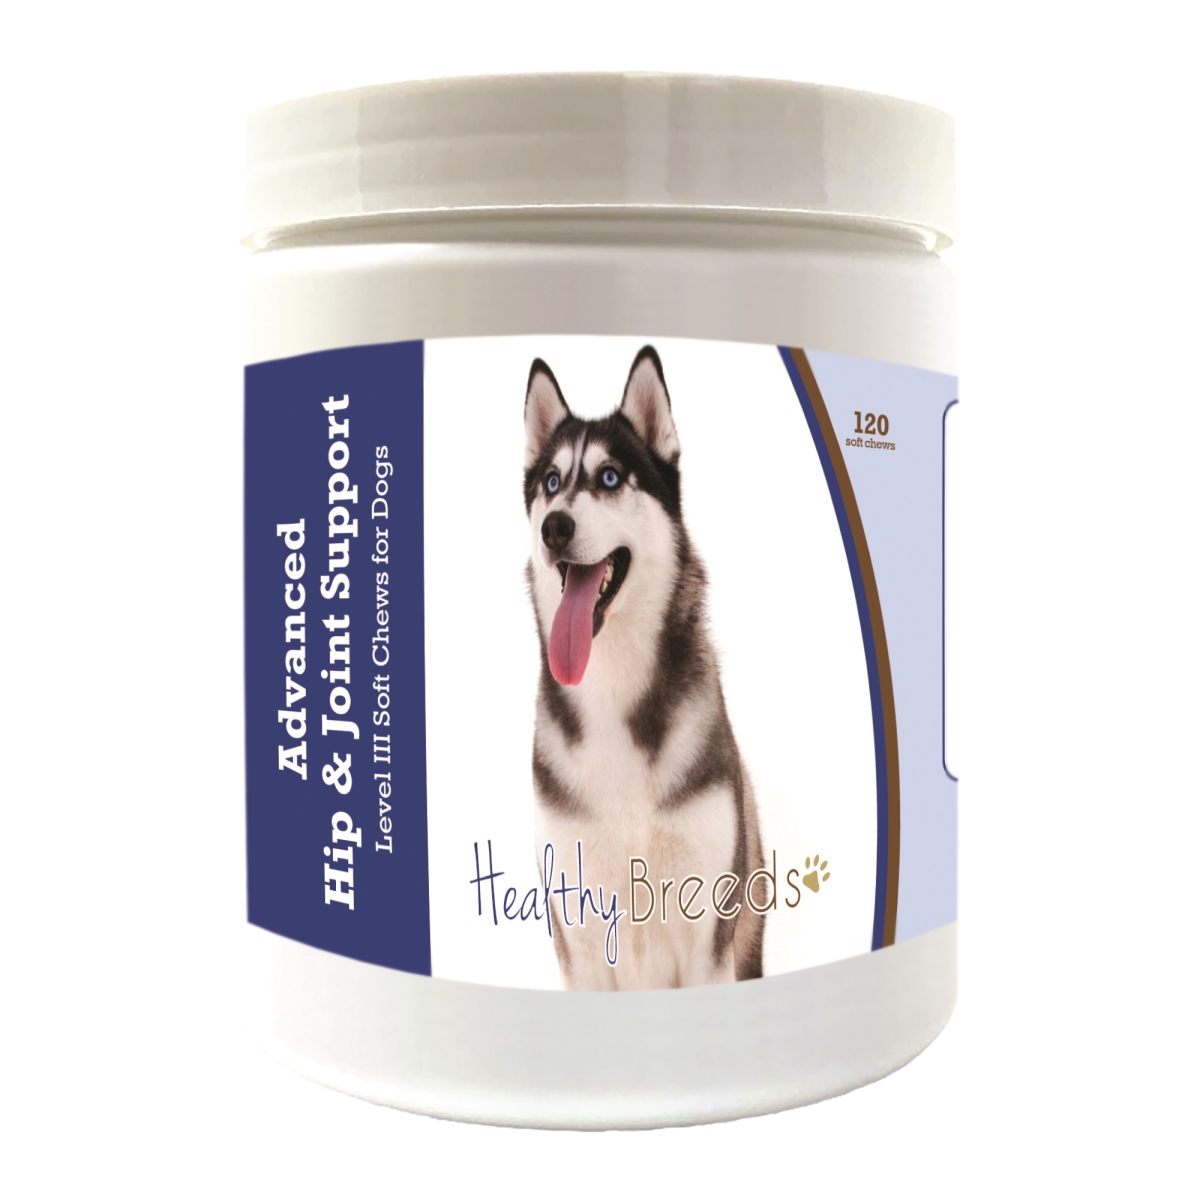 Picture of Healthy Breeds 192959899245 Siberian Husky Advanced Hip & Joint Support Level III Soft Chews for Dogs